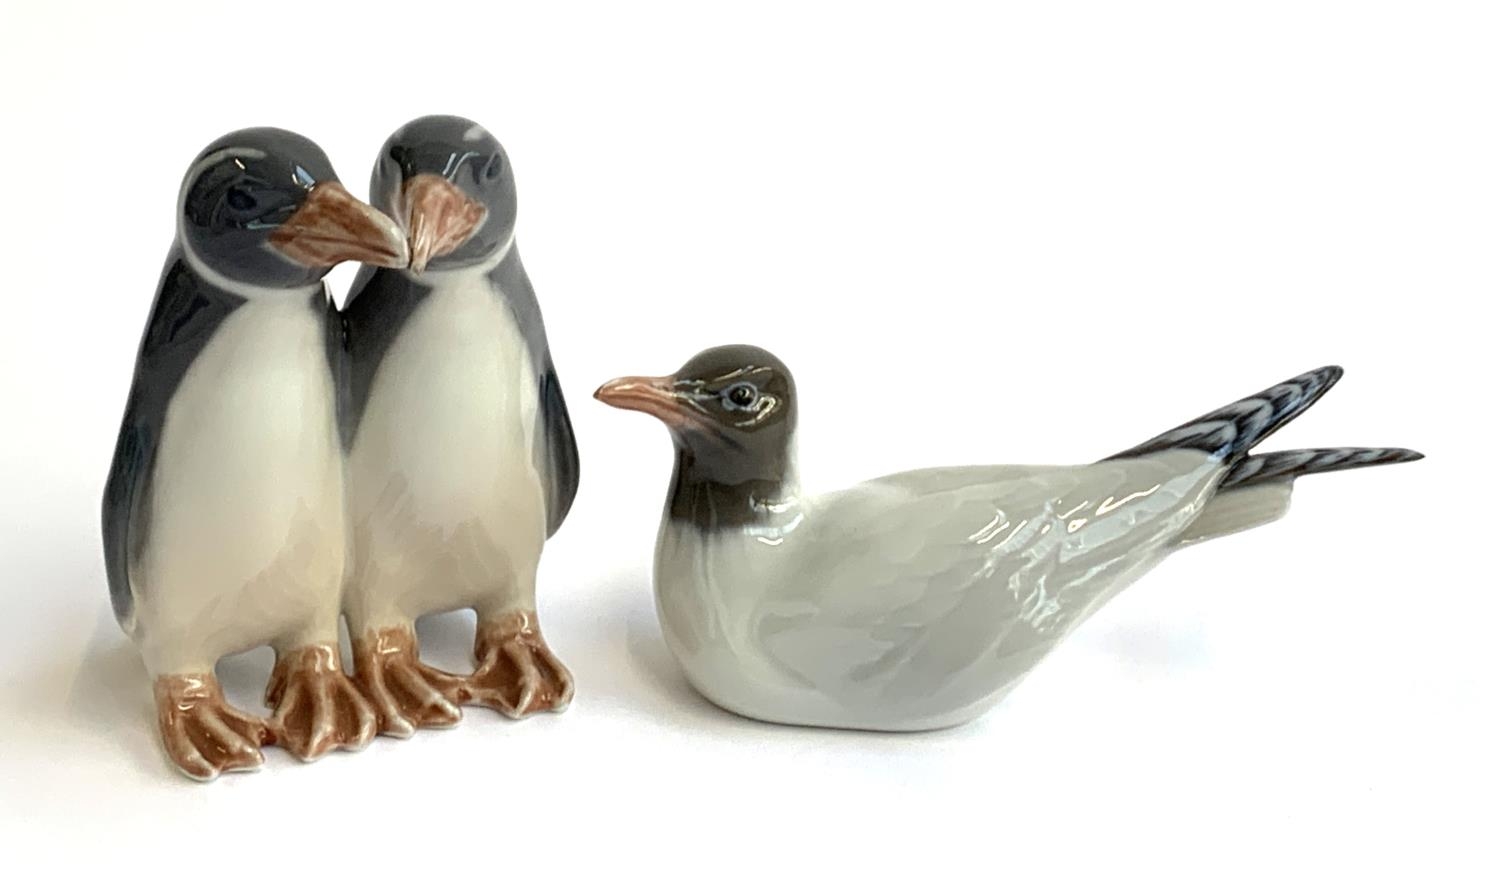 Two Royal Copenhagen figurines, pair of penguins no. 1190, seagull no. 1468